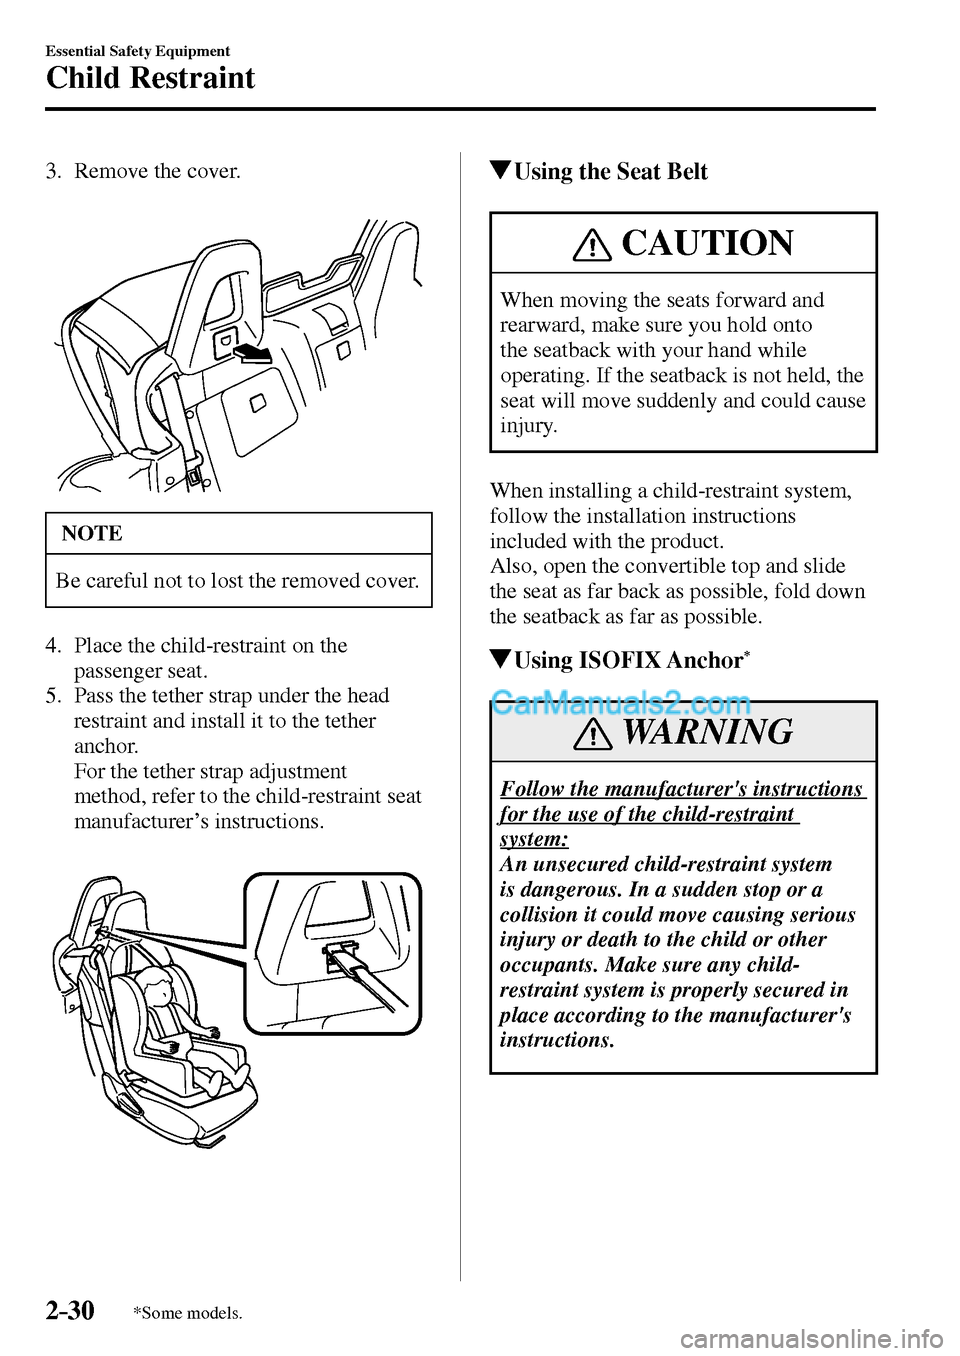 MAZDA MODEL MX-5 2017  Owners Manual - RHD (UK, Australia) (in English) 2–30
Essential Safety Equipment
Child Restraint
*Some models.
   3.   Remove  the  cover.
 NOTE
 Be careful not to lost the removed cover. 
   4.   Place  the  child-restraint  on  the 
passenger se